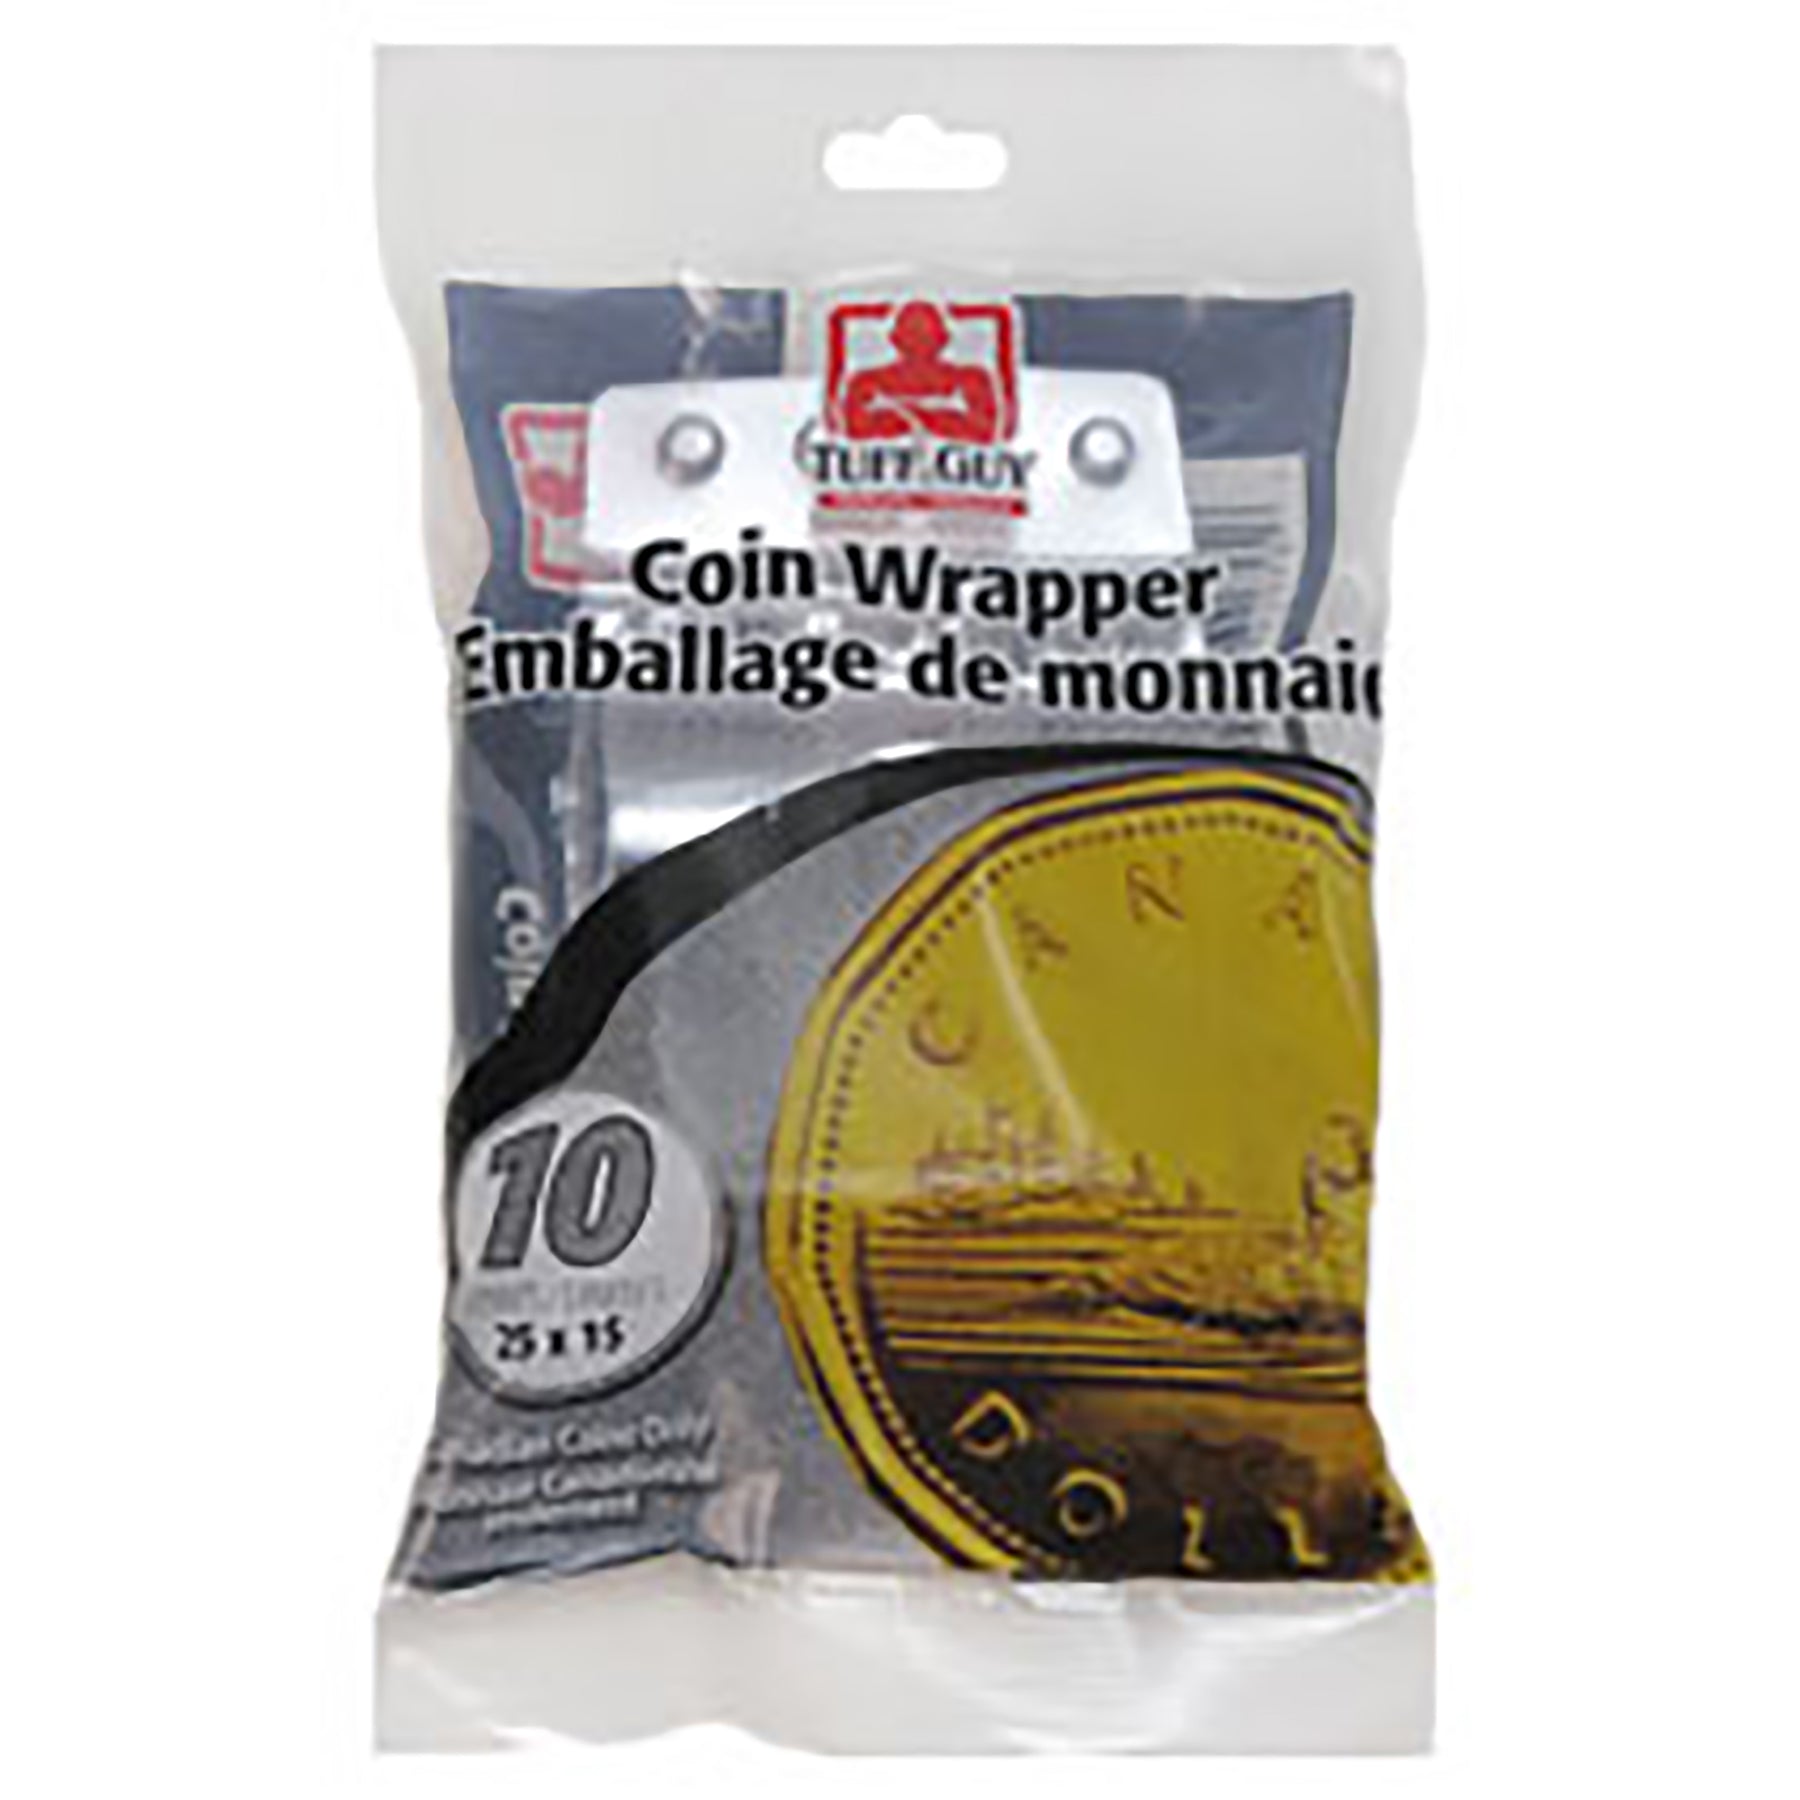 Tuff Guy 10 Coin Wrappers $1.00 Plastic